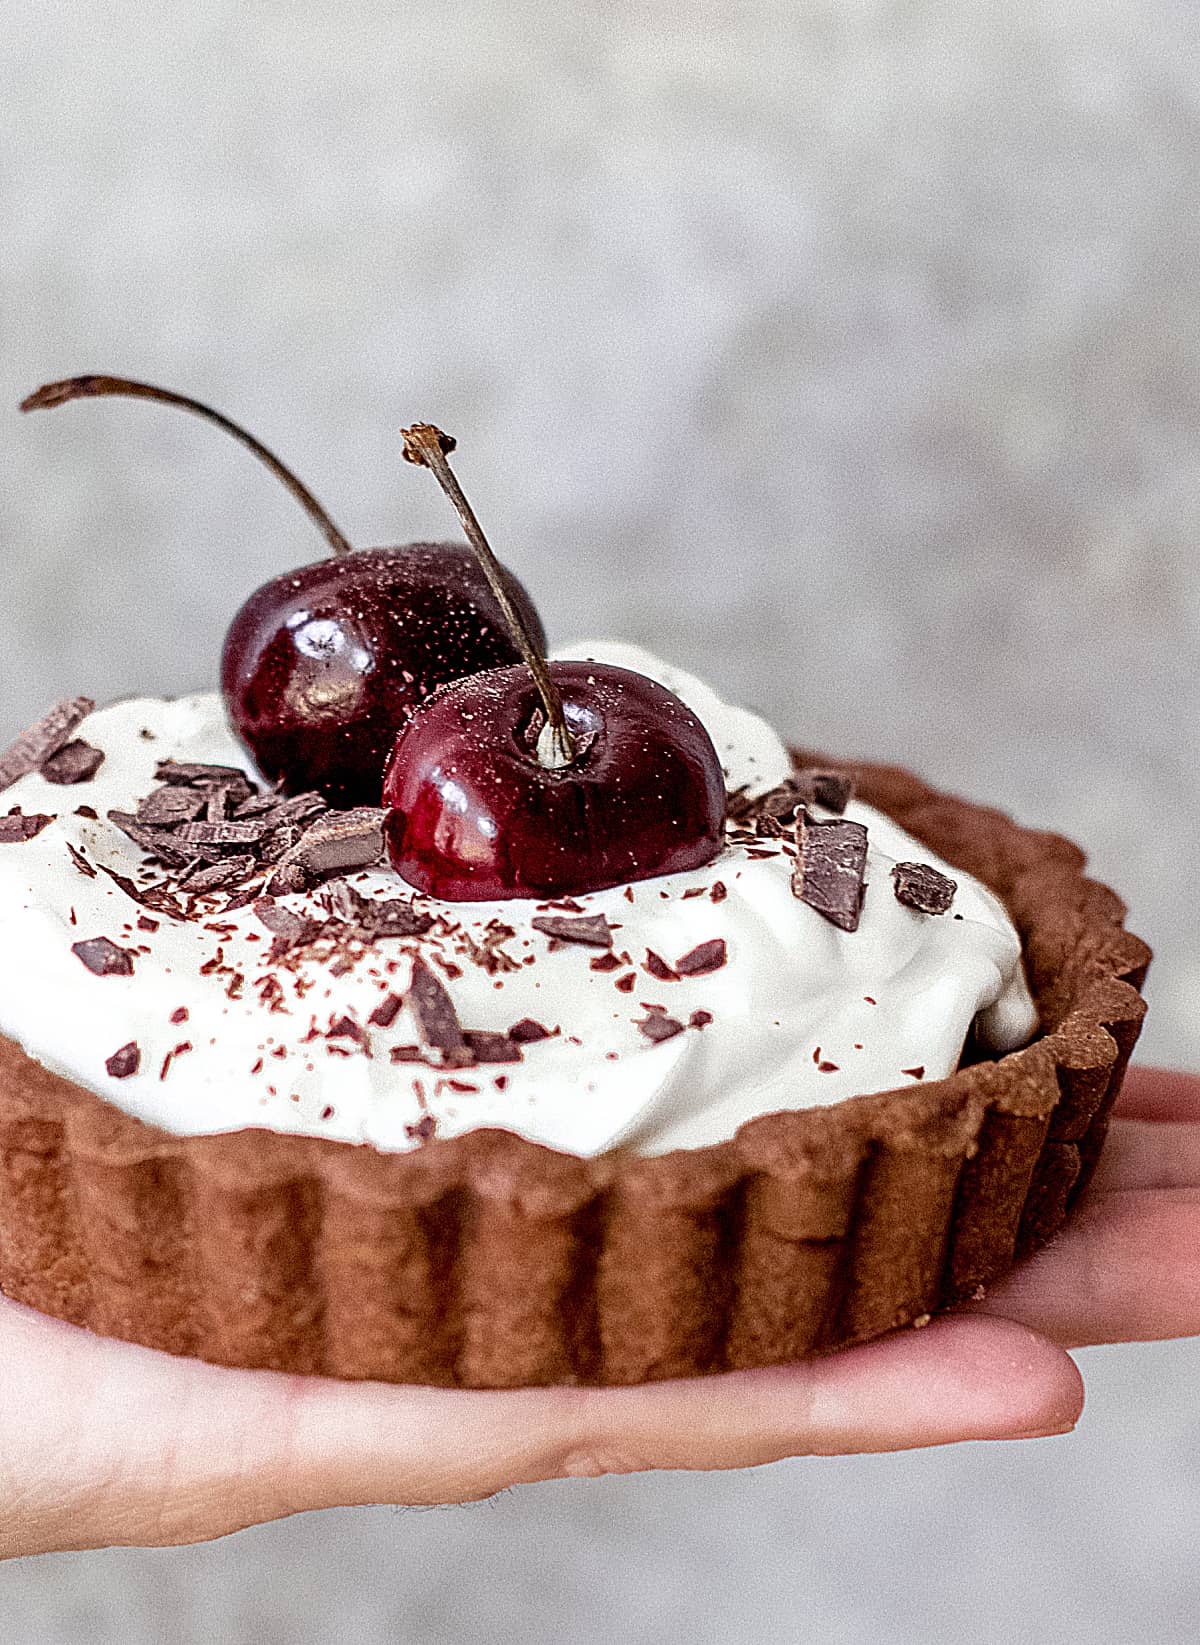 Hand holding small chocolate cream tart with whole cheeries on top